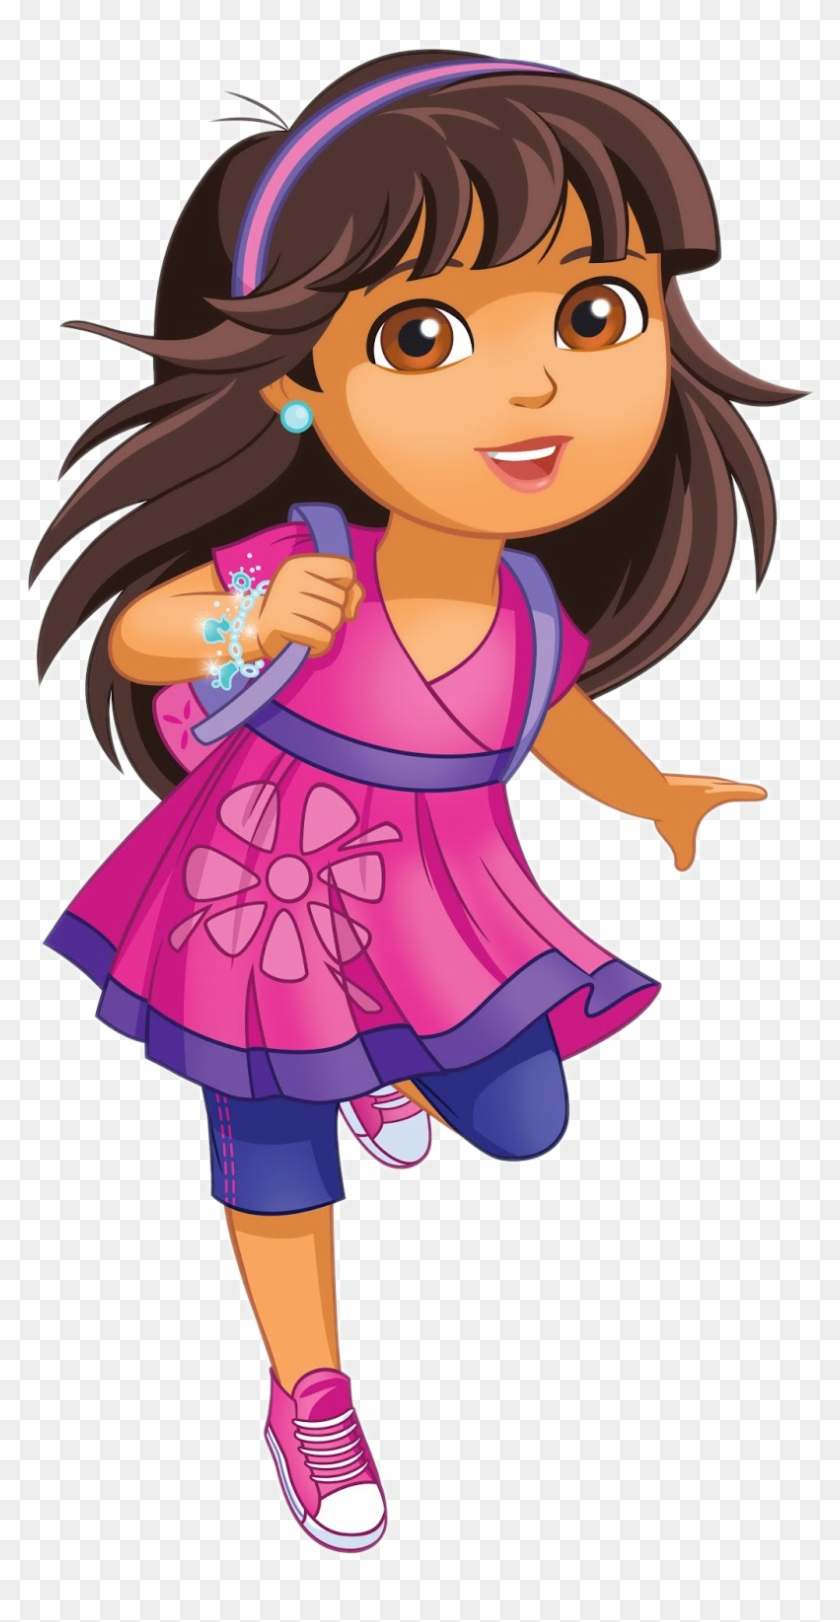 Dora And Friends - Dora And Friends Png Clipart #449698